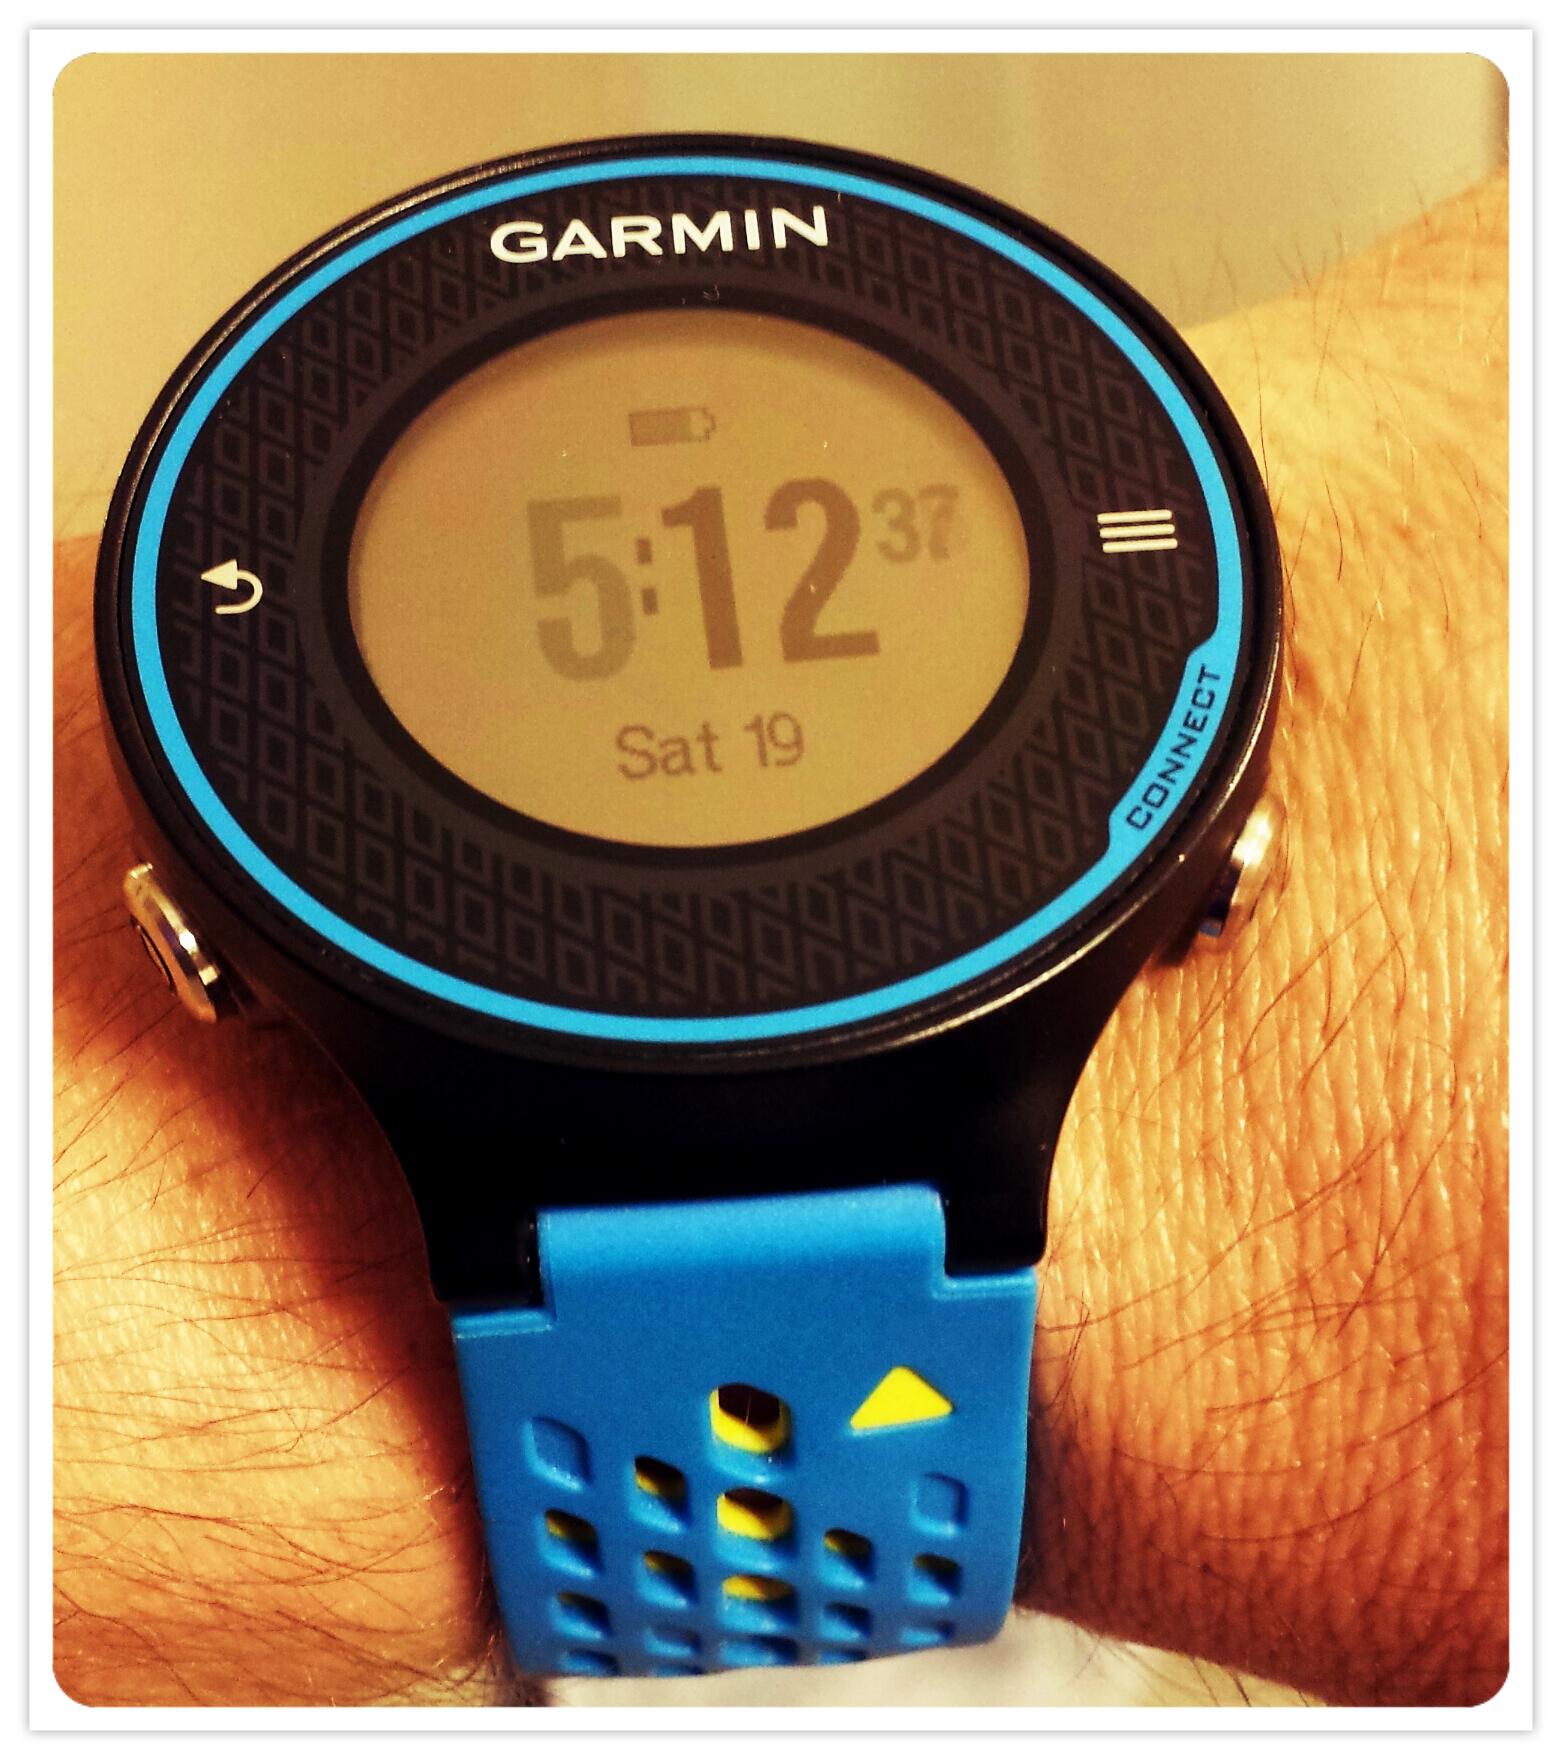 Garmin Twitter: "Running the #BostonMarathon with your 620? Stop by our booth for a special band (while supplies last). Twitter